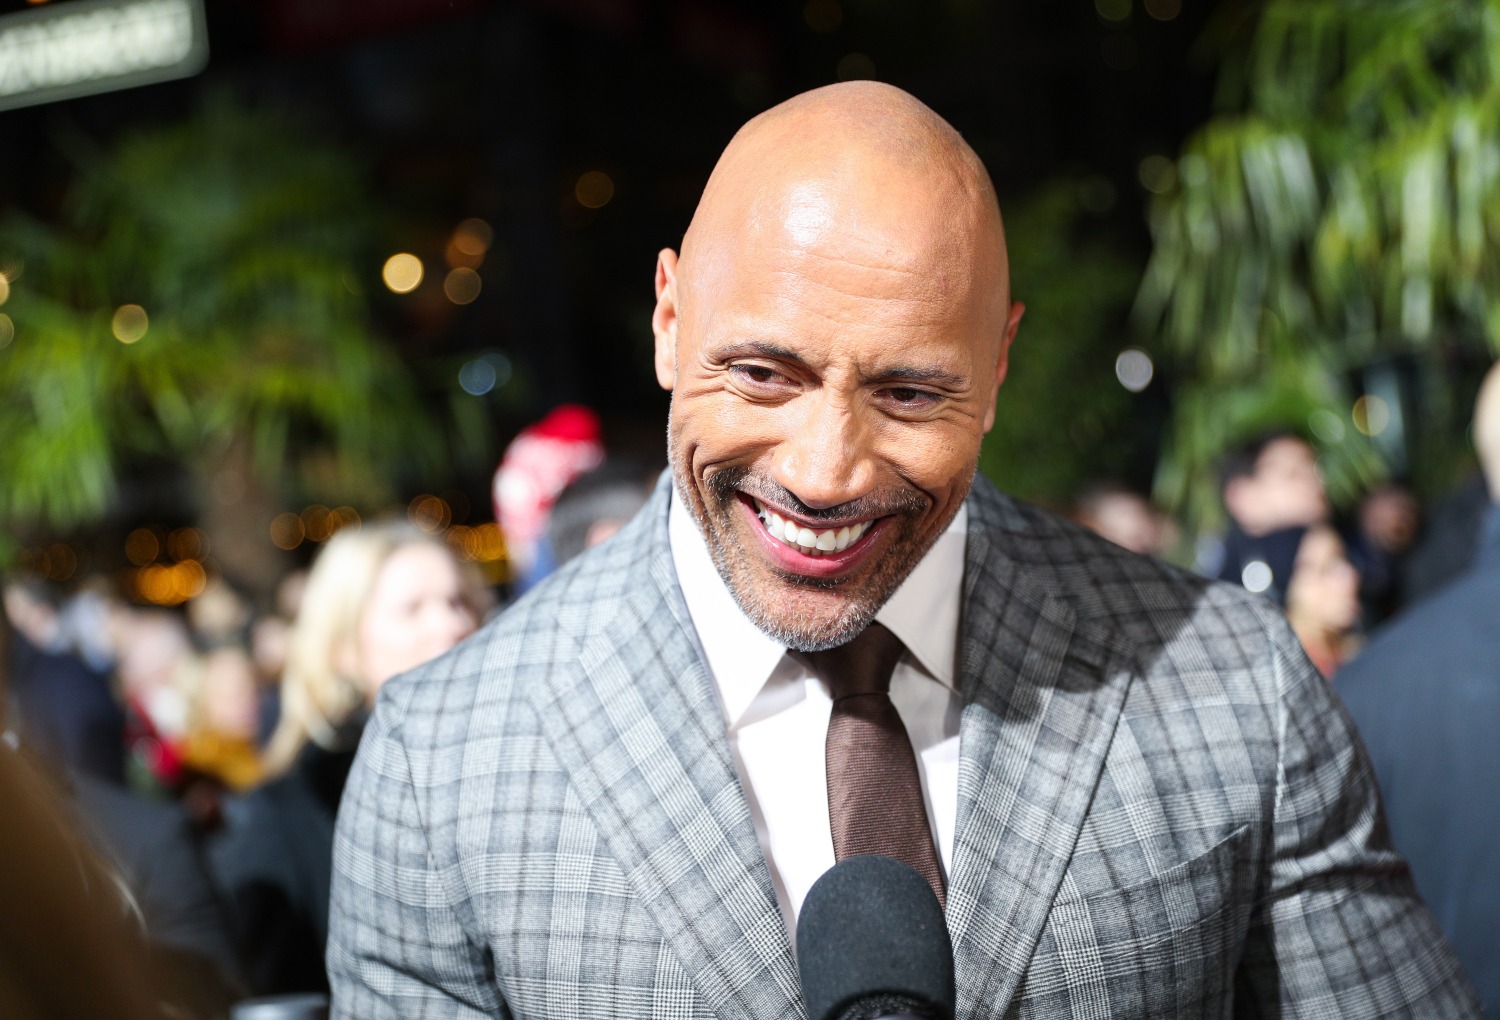 The Rock just bought the XFL for $15 million along with RedBird Capital.